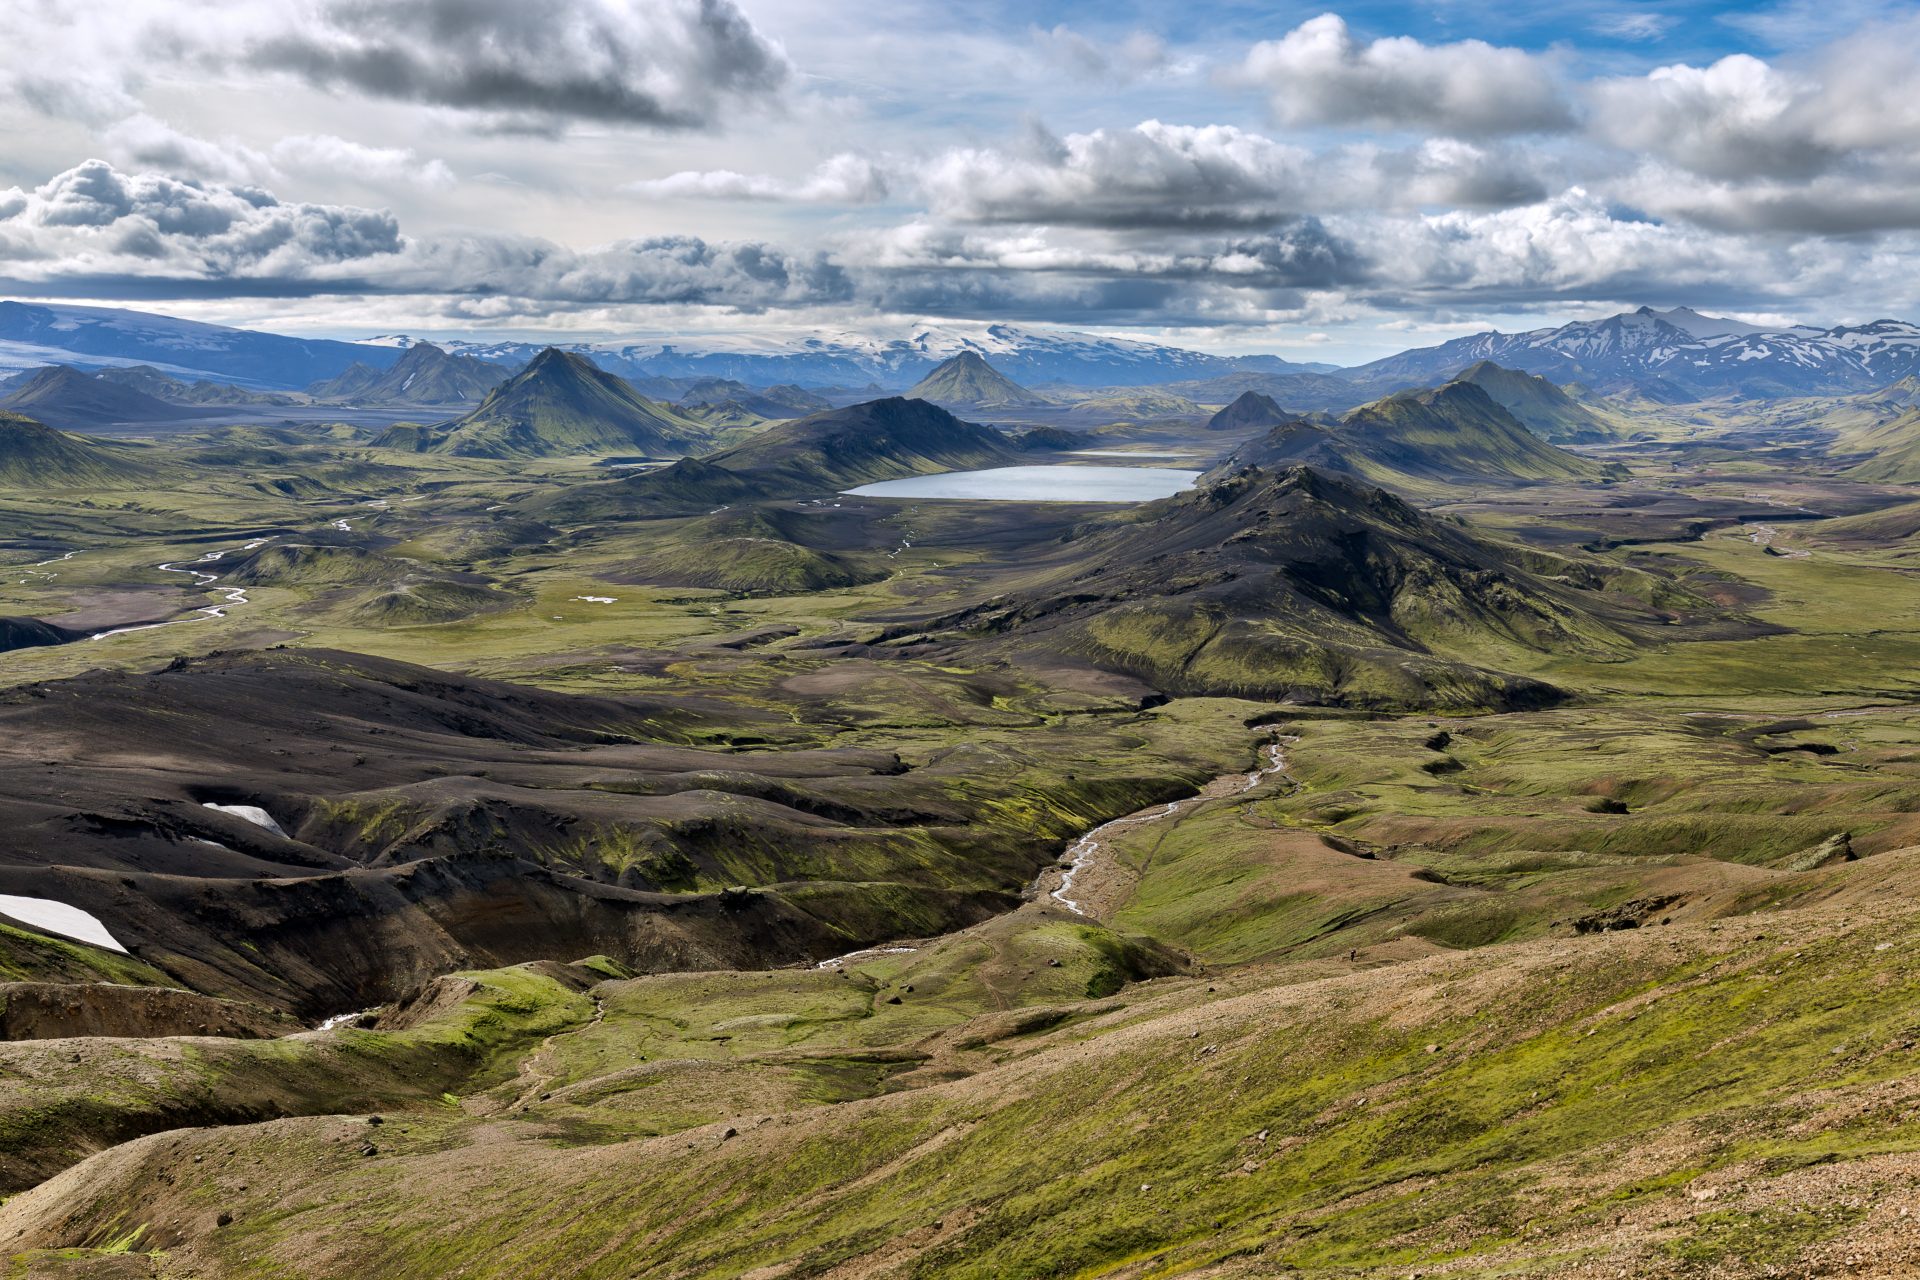 <p>This is one of Iceland's must-do treks. In the midst of breathtaking wild, desert and volcanic landscapes, the Laugavegur gives hikers the impression of finding themselves on another planet. With a distance of 55 km, the trail starts in Landmannalaugar and ends in Thórsmörk. Due to the country's weather conditions, this hike can only be done between June and September.</p>